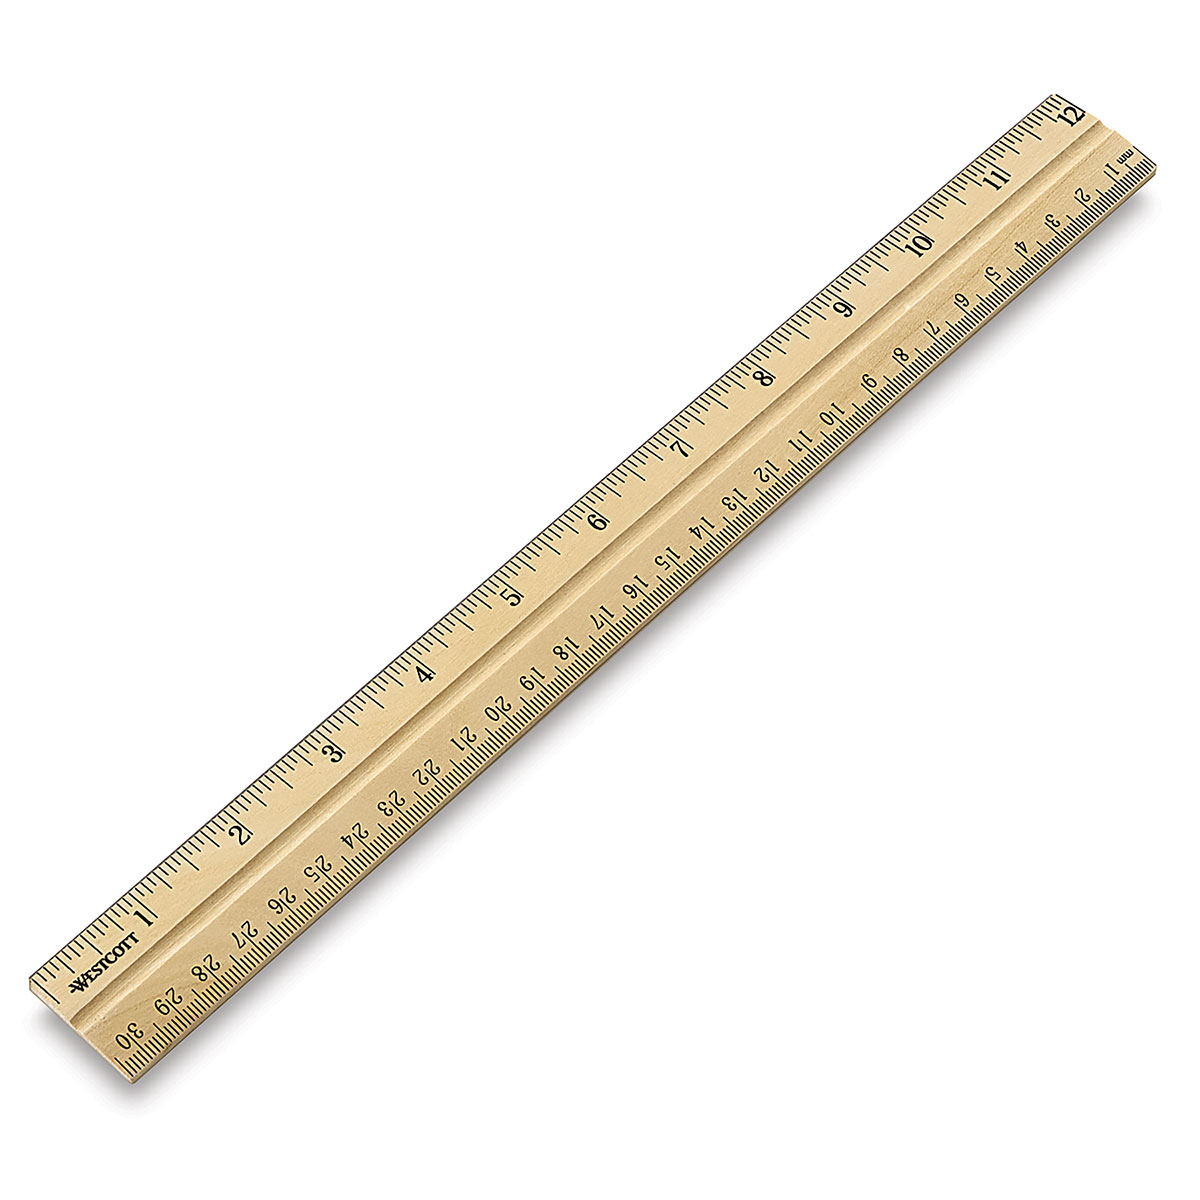 A classroom classic this 12 (31cm) long wood ruler has a clear lacquer fini...